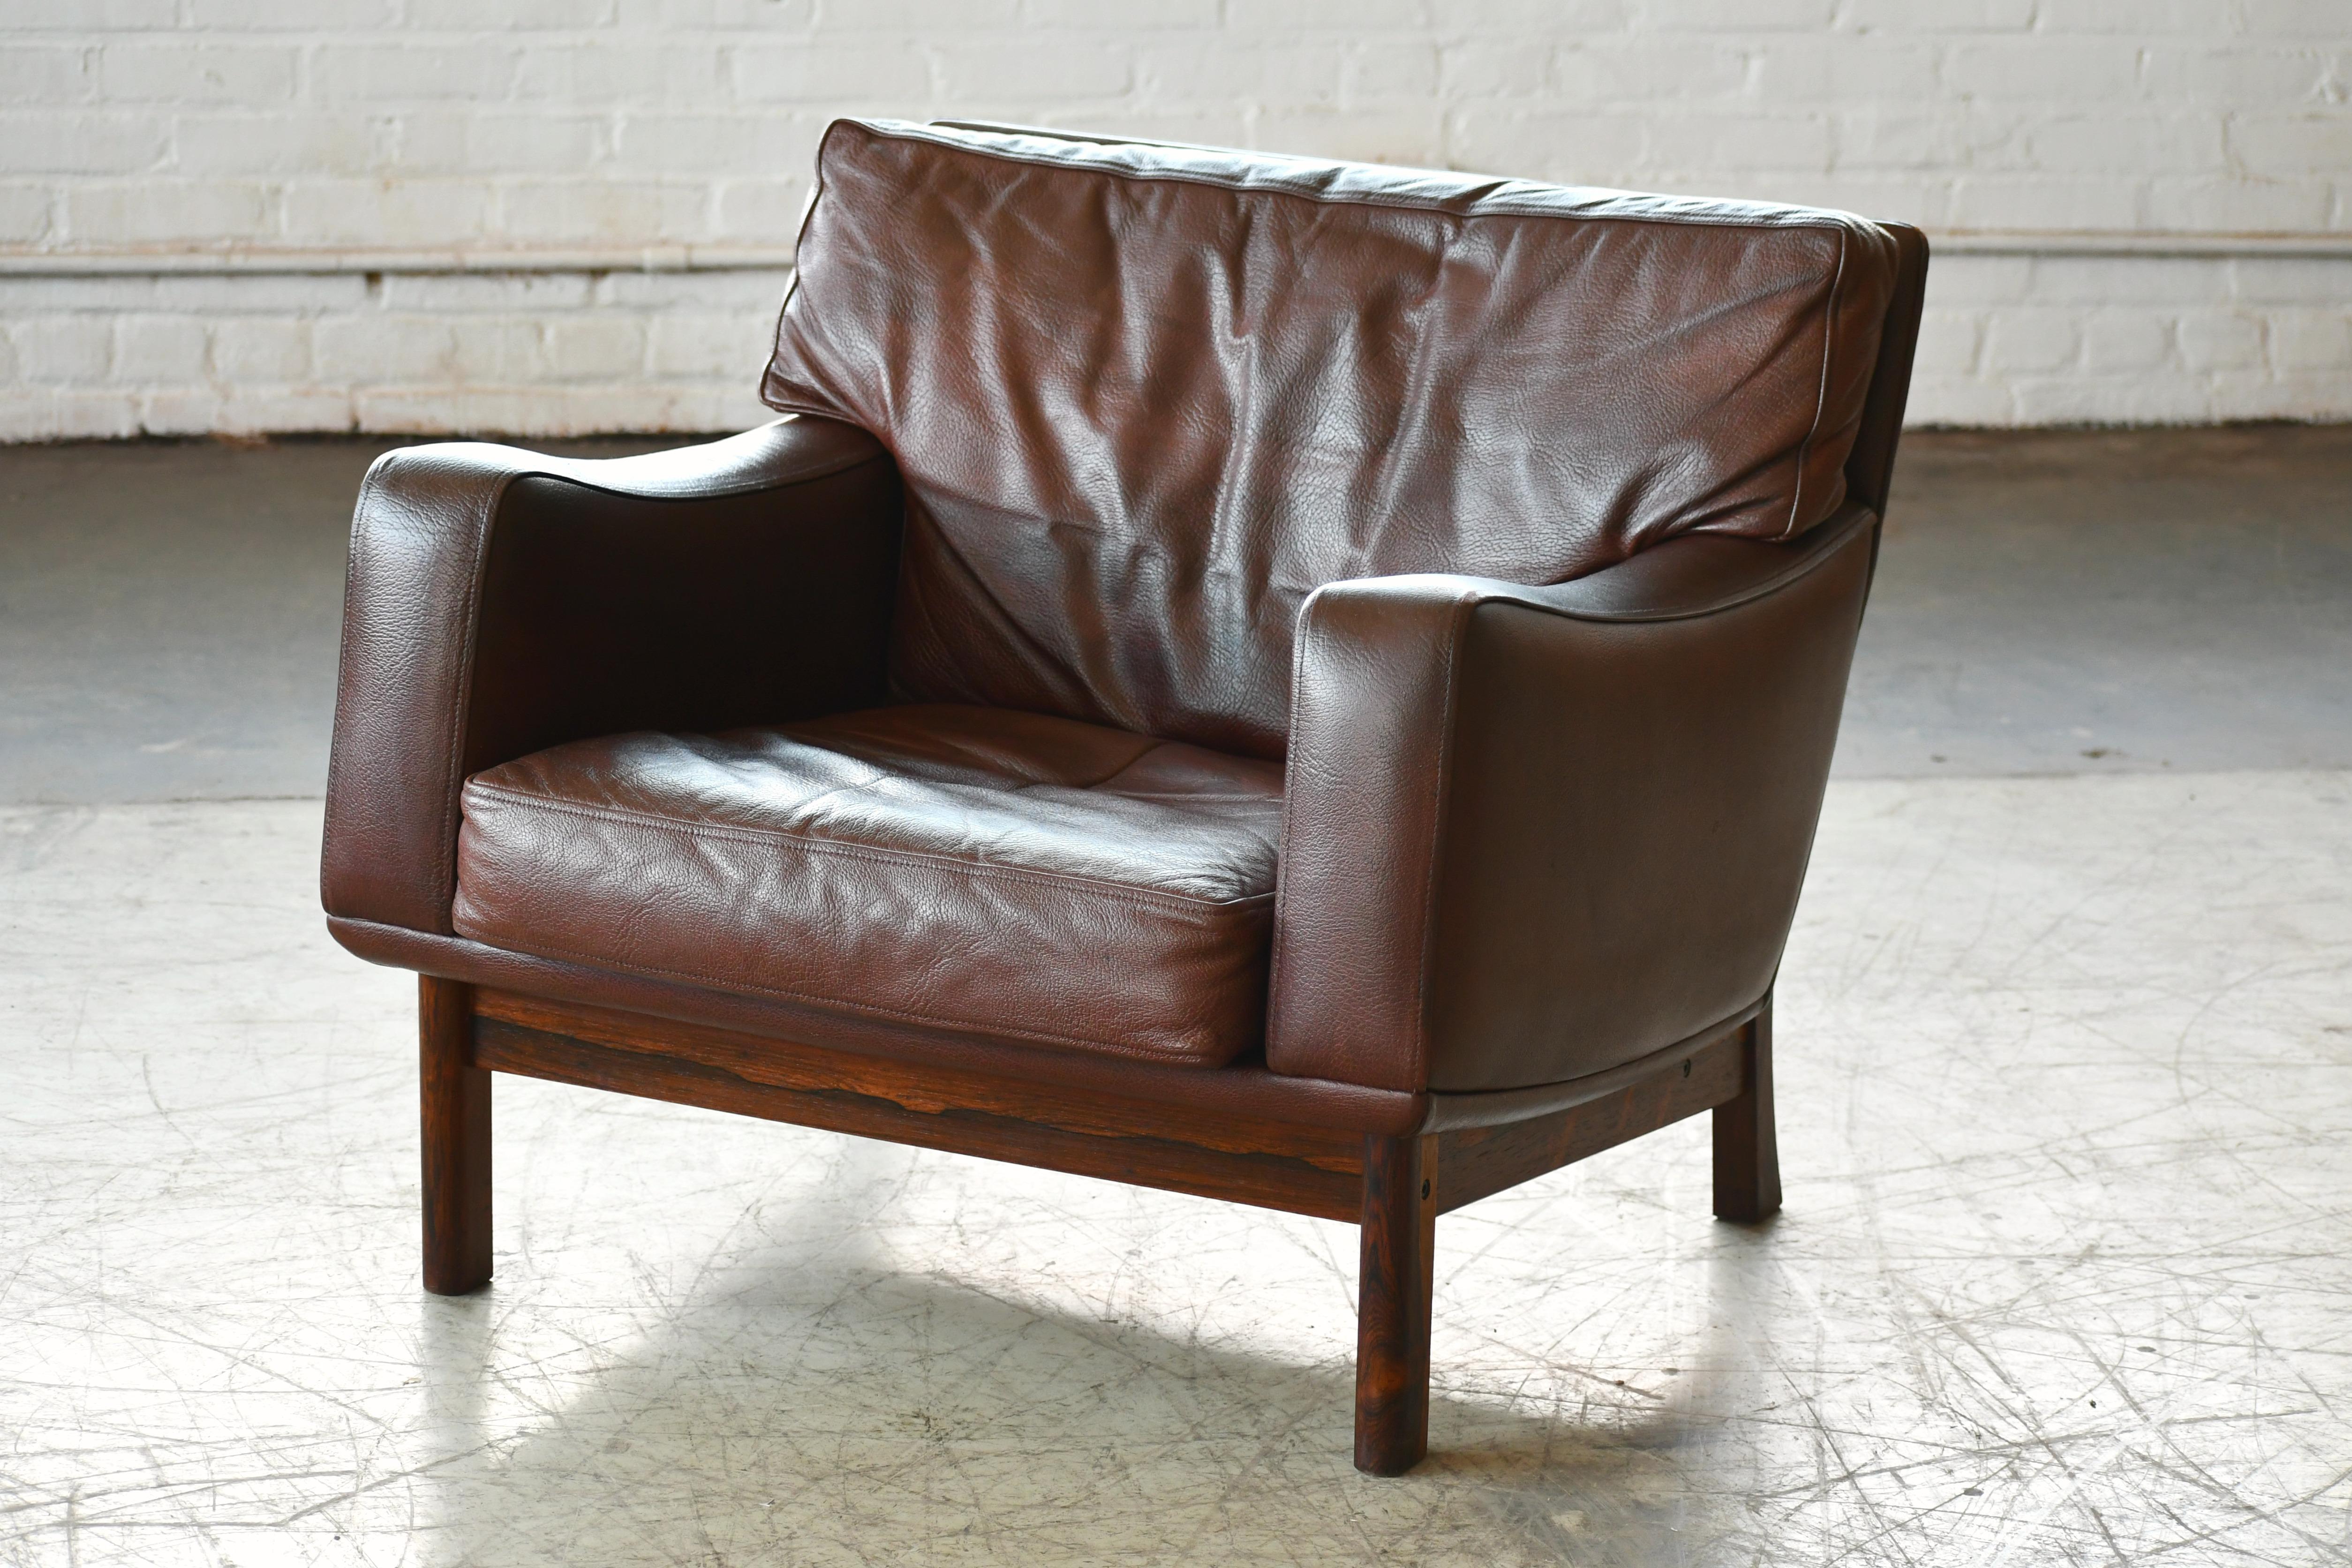 Mid-20th Century Danish 1960s Lounge Chair in Brown Leather and Rosewood by Erhardsen & Andersen